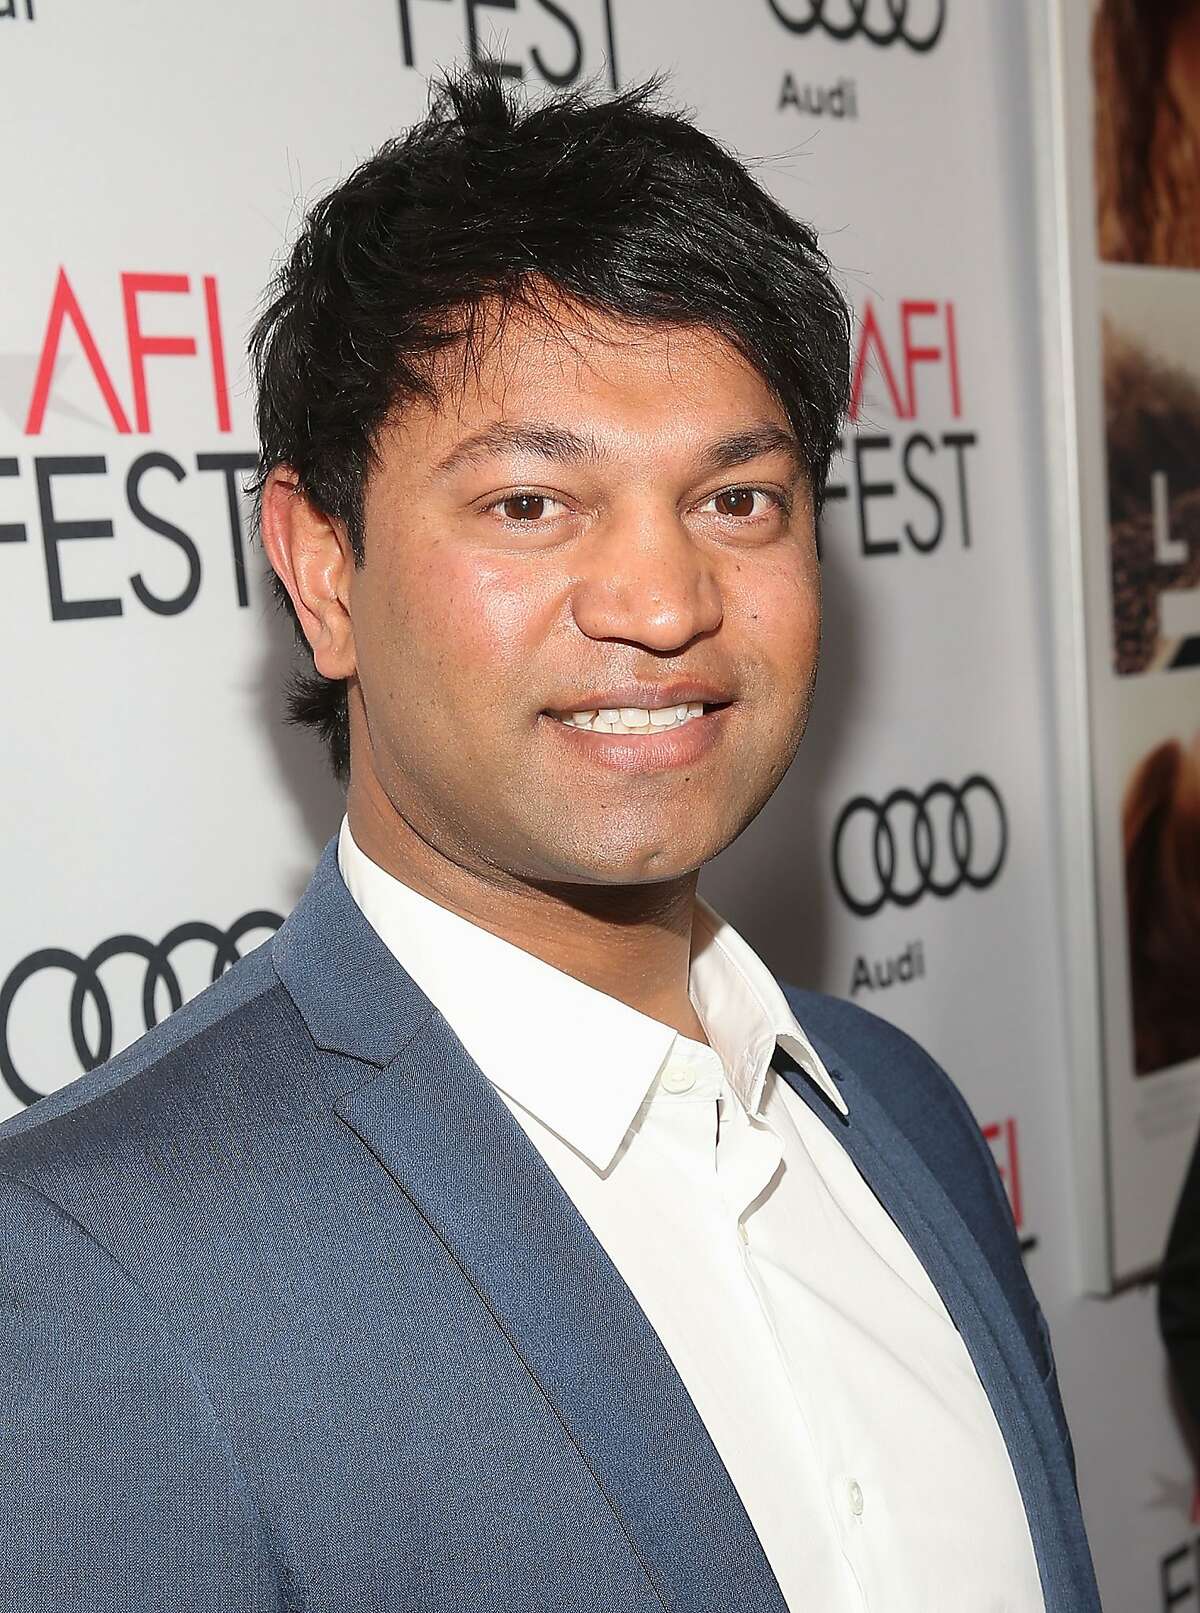 LOS ANGELES, CA - NOVEMBER 11: Author Saroo Brierley attends the premiere of The Weinstein Company's 'Lion' at AFI Fest 2016 on November 11, 2016 in Los Angeles, California. (Photo by Jesse Grant/Getty Images for TWC-Dimension)